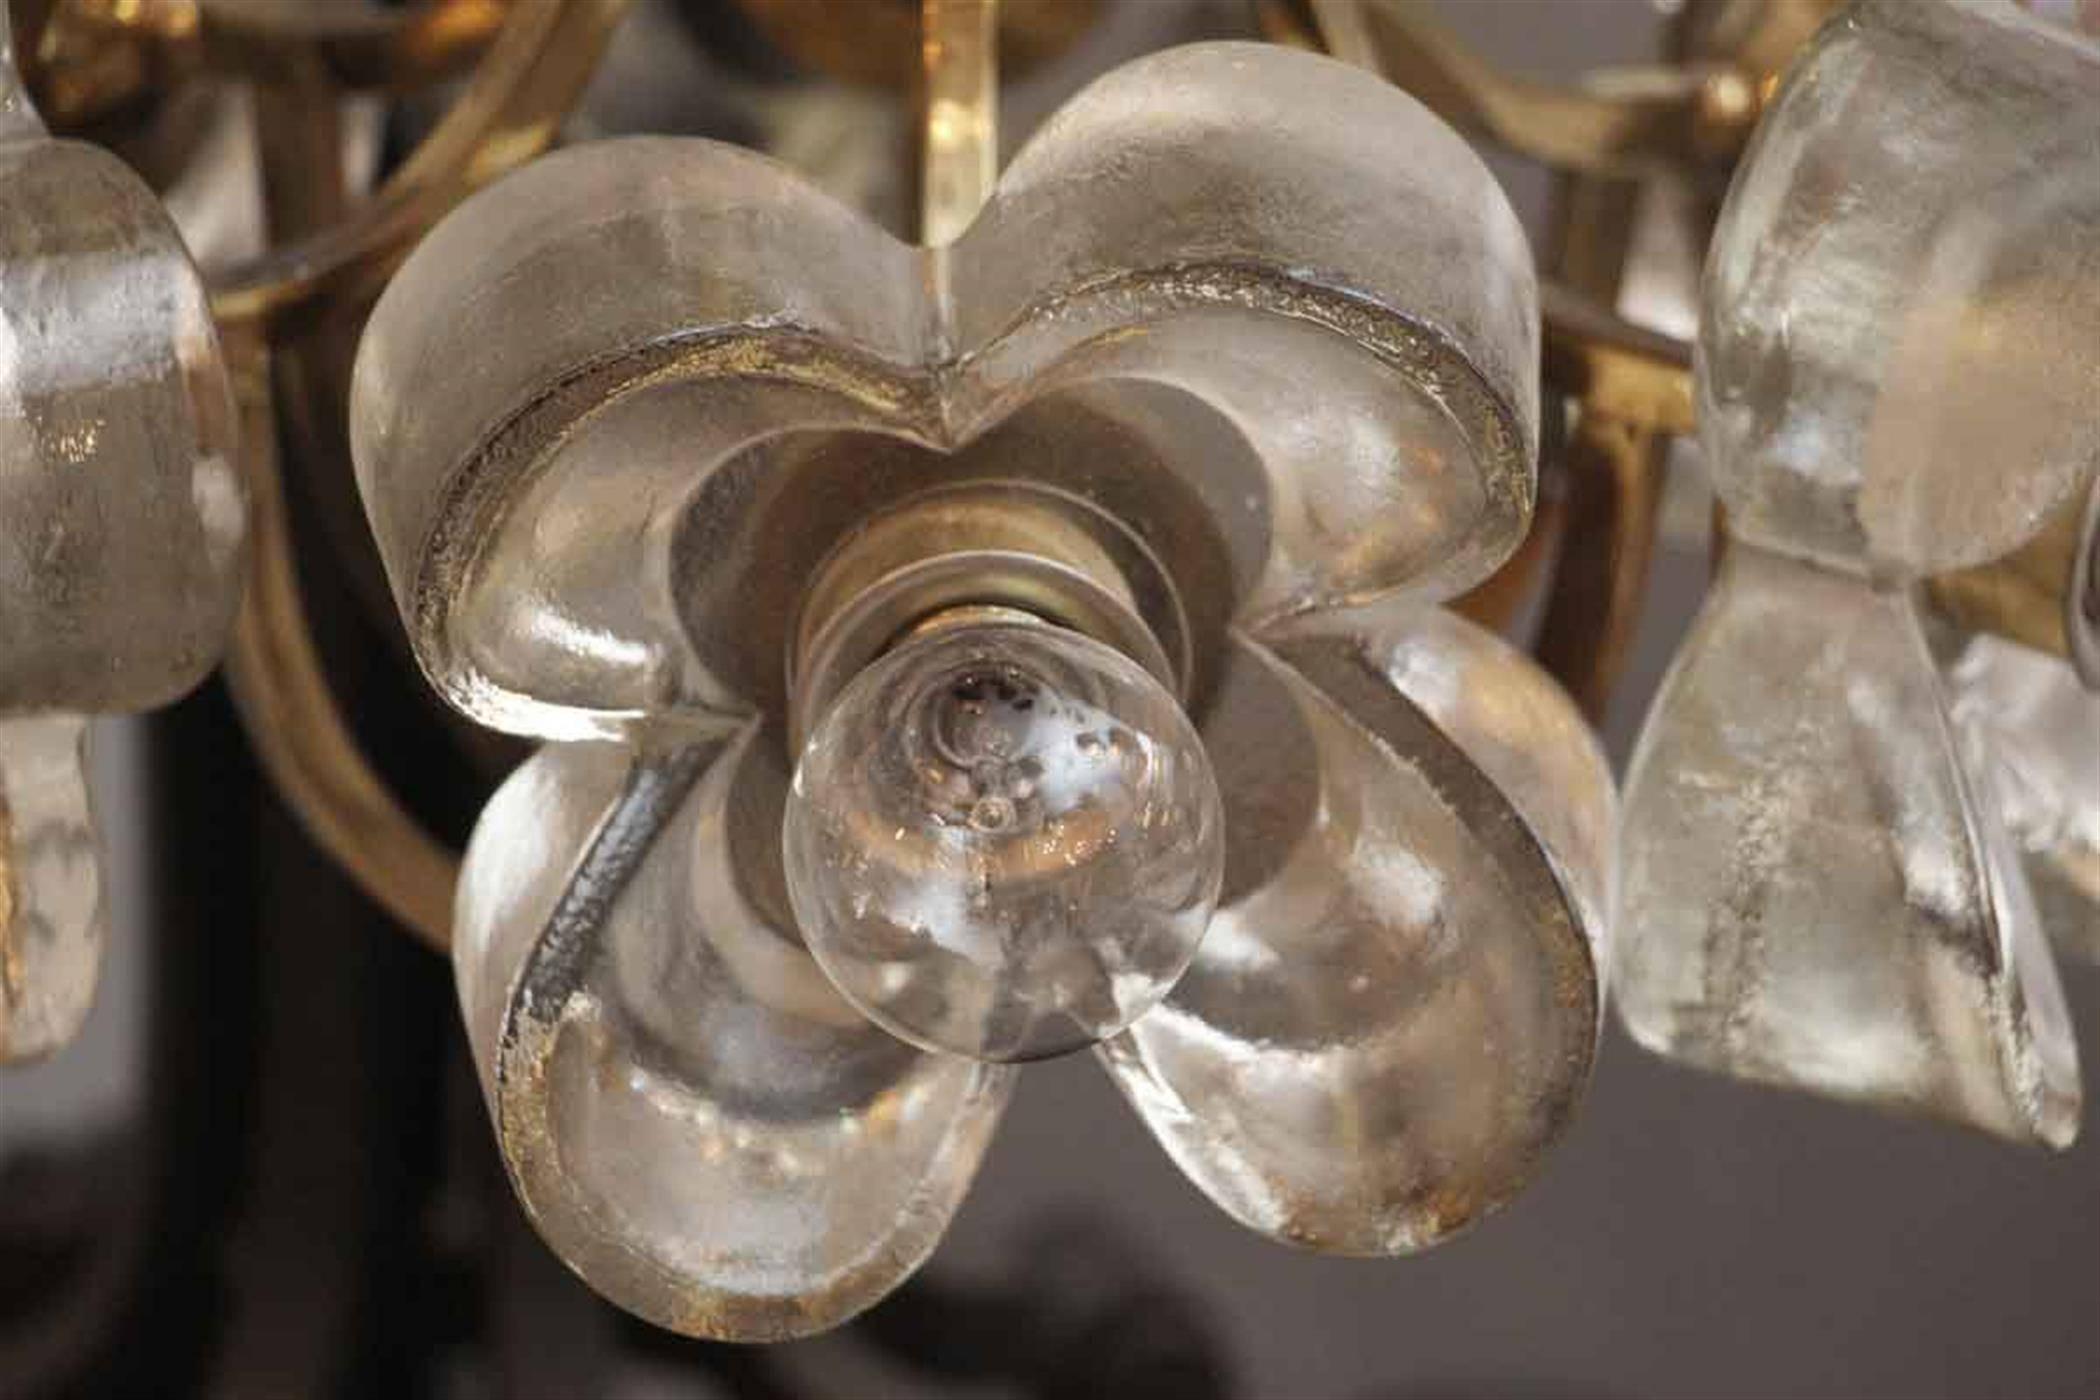 1990s Mid-Century Modern style clear glass floral pendant light with a polished brass frame. There are six lights total, each adorned with a glass flower. This can be seen at our 5 East 16th St location in Manhattan.